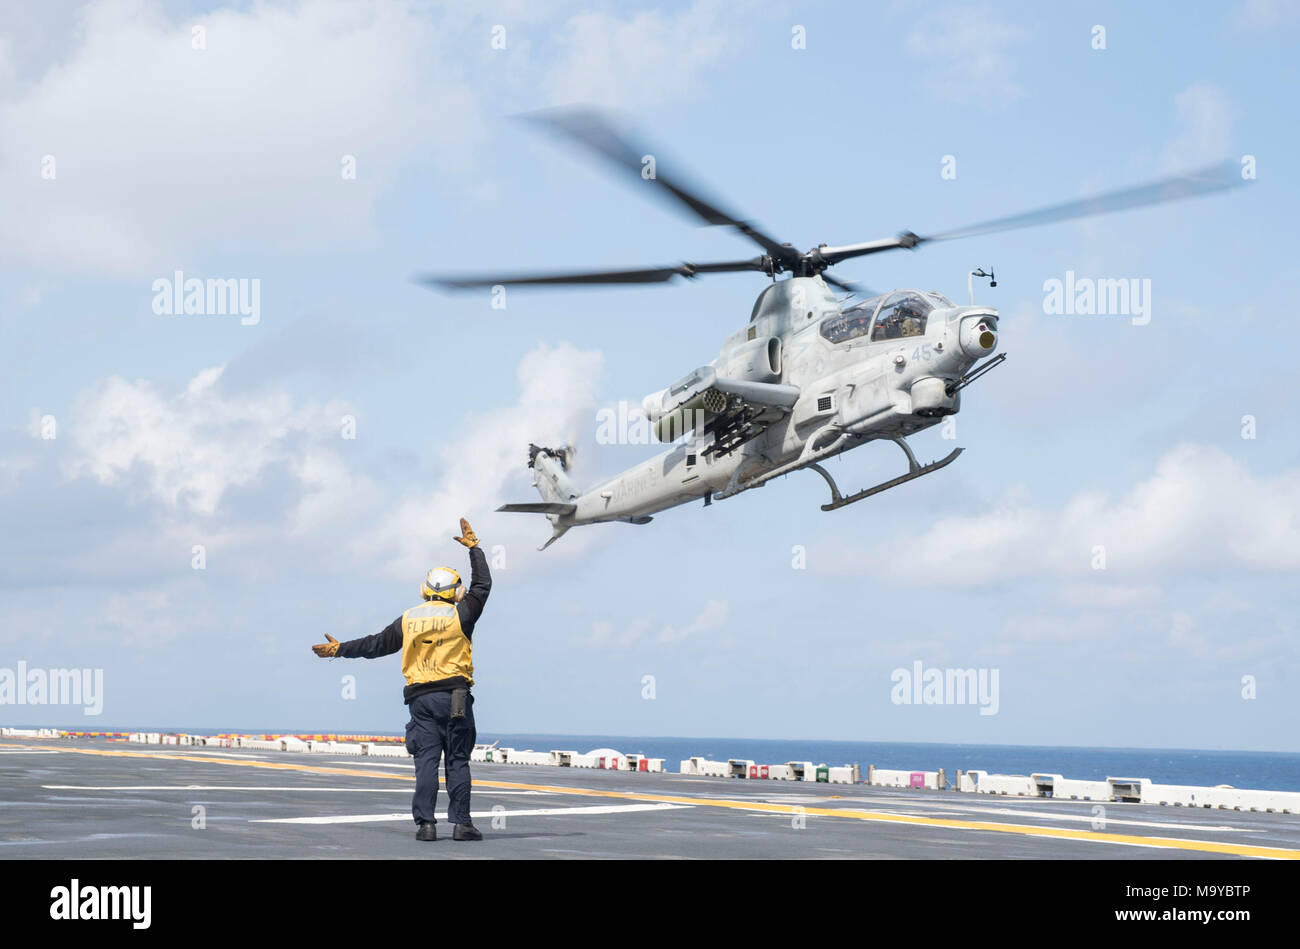 180328-N-RD713-046 PHILIPPINE SEA (March 28, 2018) An AH-1Z Viper, assigned to the 'Gunfighters' of Marine Light Attack Helicopter Squadron (HMLA) 369, lands on the flight deck of the amphibious assault ship USS Bonhomme Richard (LHD 6). Bonhomme Richard is operating in the Indo-Pacific region as part of a regularly scheduled patrol and provides a rapid-response capability in the event of a regional contingency or natural disaster. (U.S. Navy photo by Mass Communication Specialist 3rd Class Zachary DiPadova/Released) Stock Photo